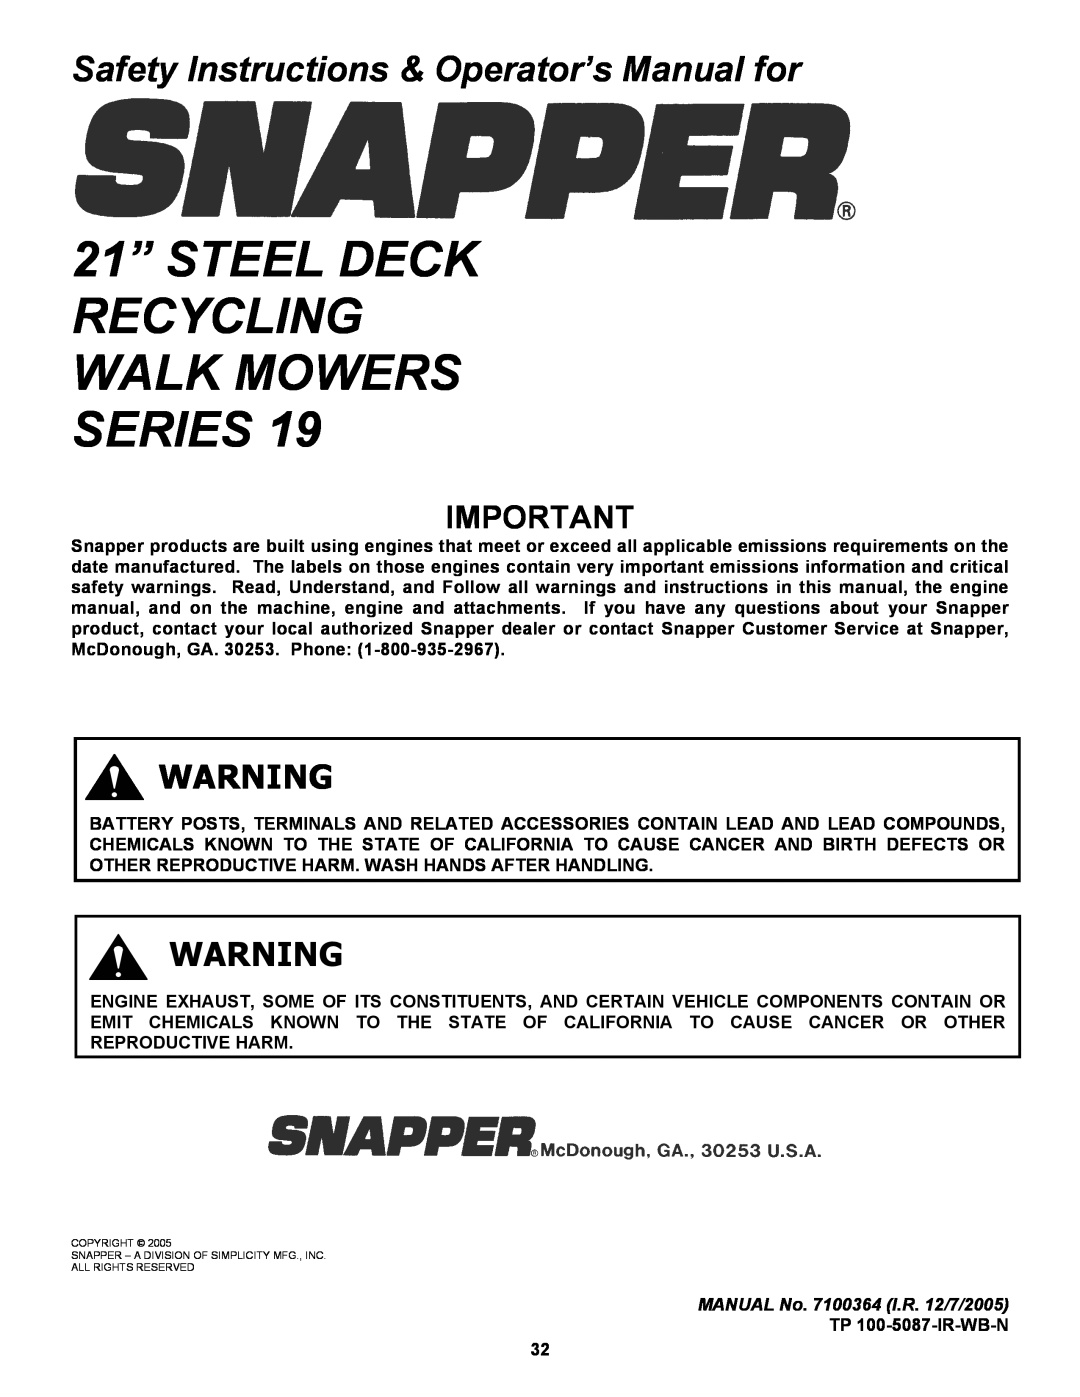 Snapper RP2167519B, RP217019BVE 21” STEEL DECK RECYCLING WALK MOWERS SERIES, Safety Instructions & Operator’s Manual for 